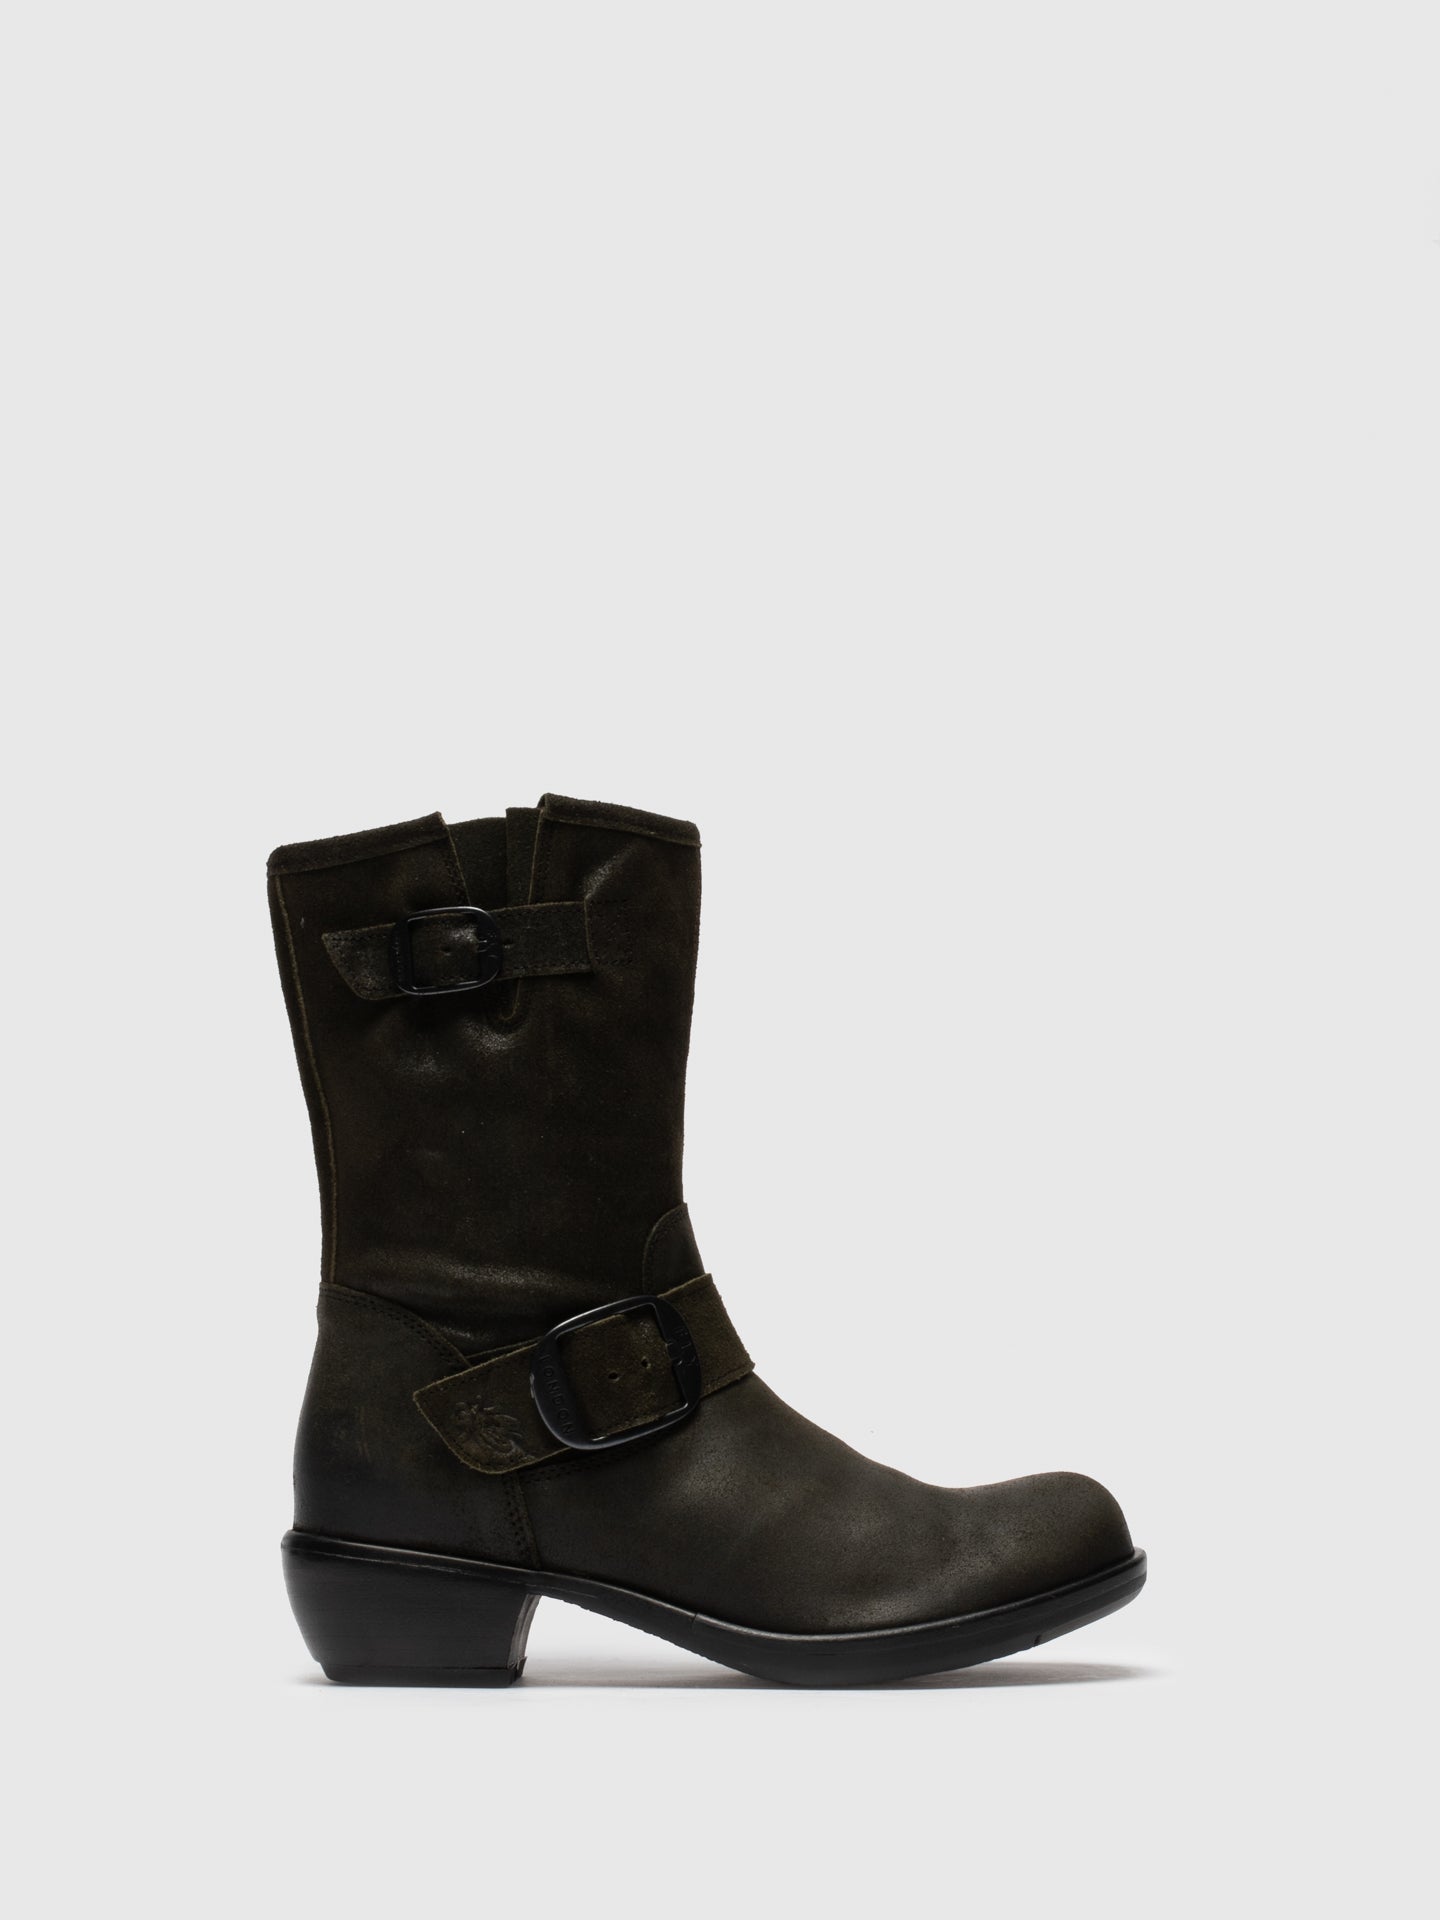 Fly London Brown Zip Up Boots